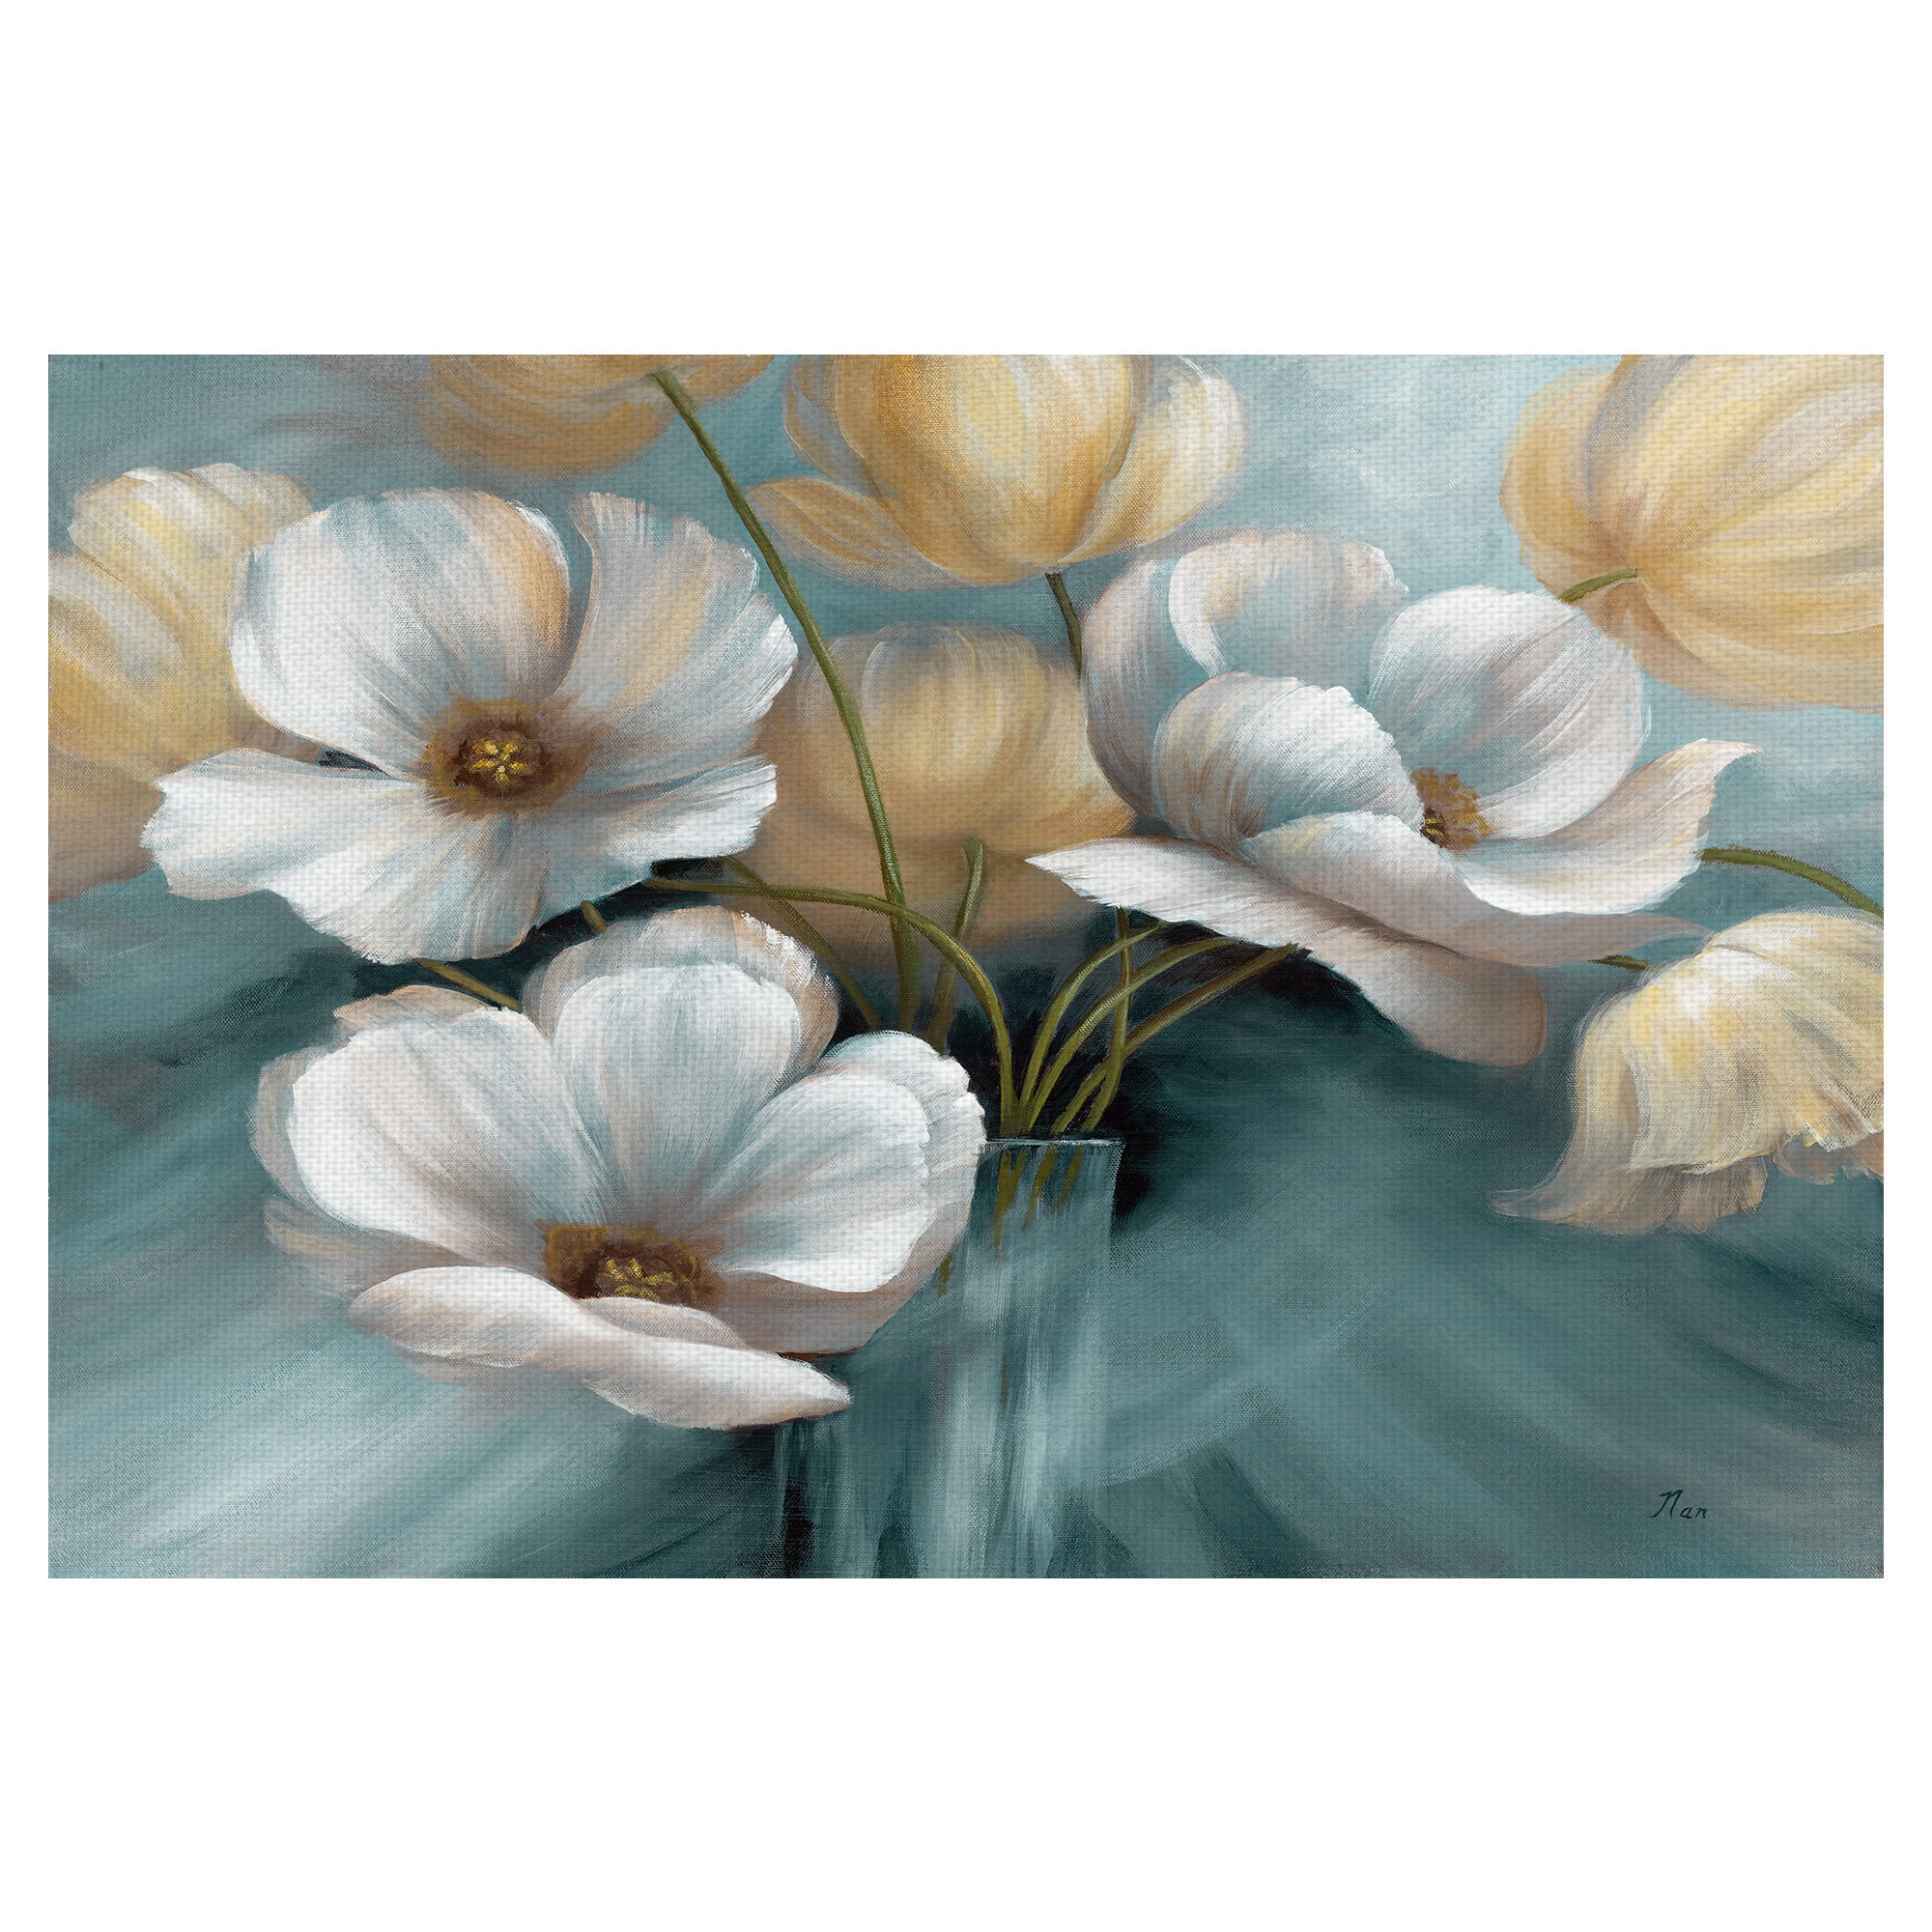 Masterpiece Art Gallery Scent of Summer Anemone Teal by Nan Canvas Art Print  24